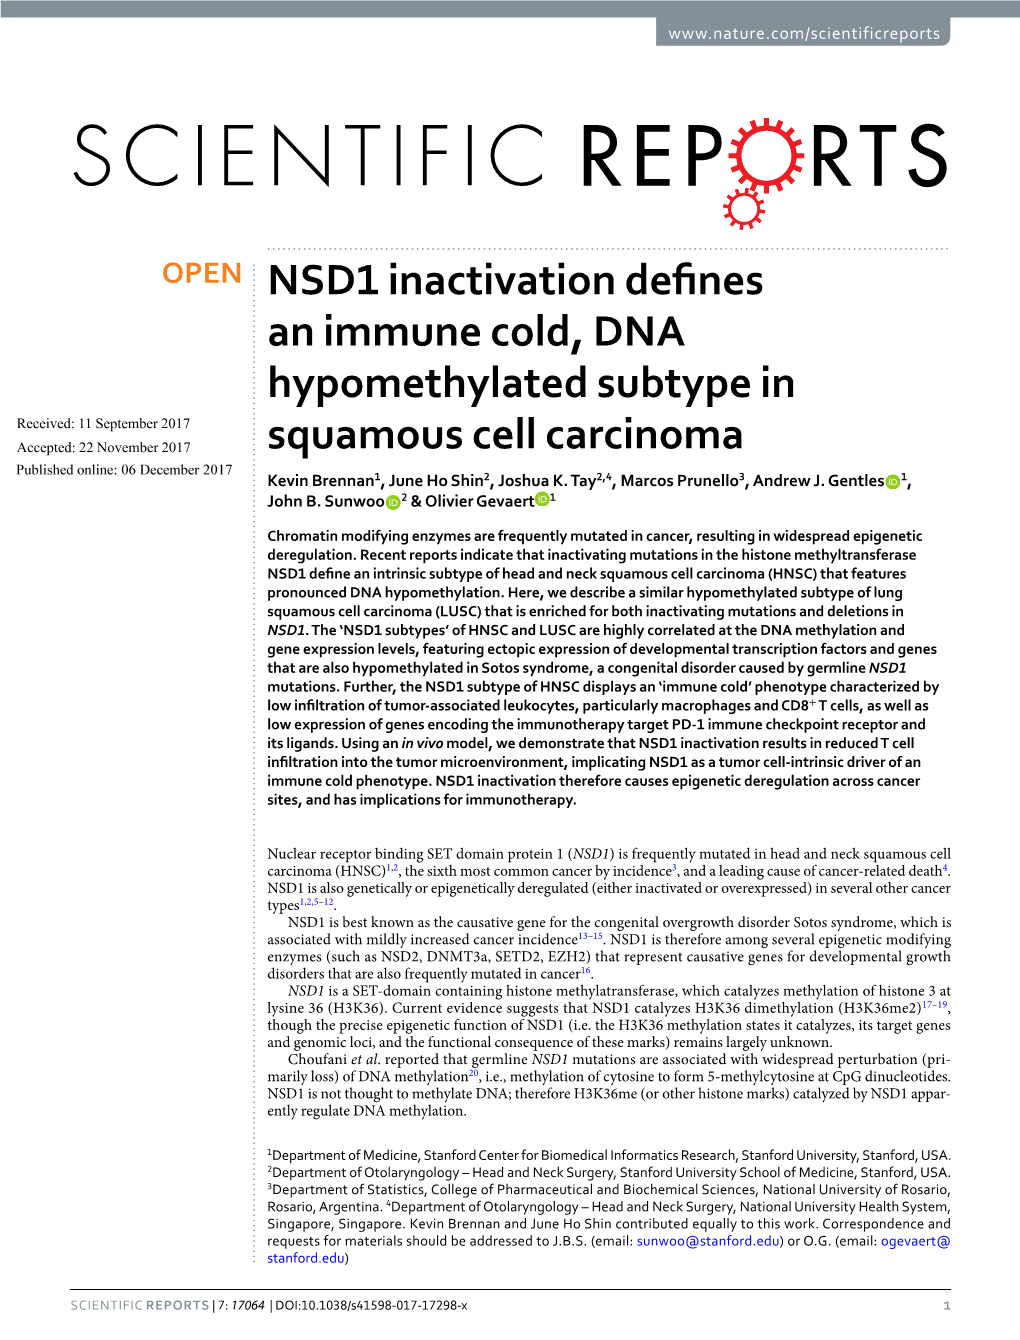 NSD1 Inactivation Defines an Immune Cold, DNA Hypomethylated Subtype